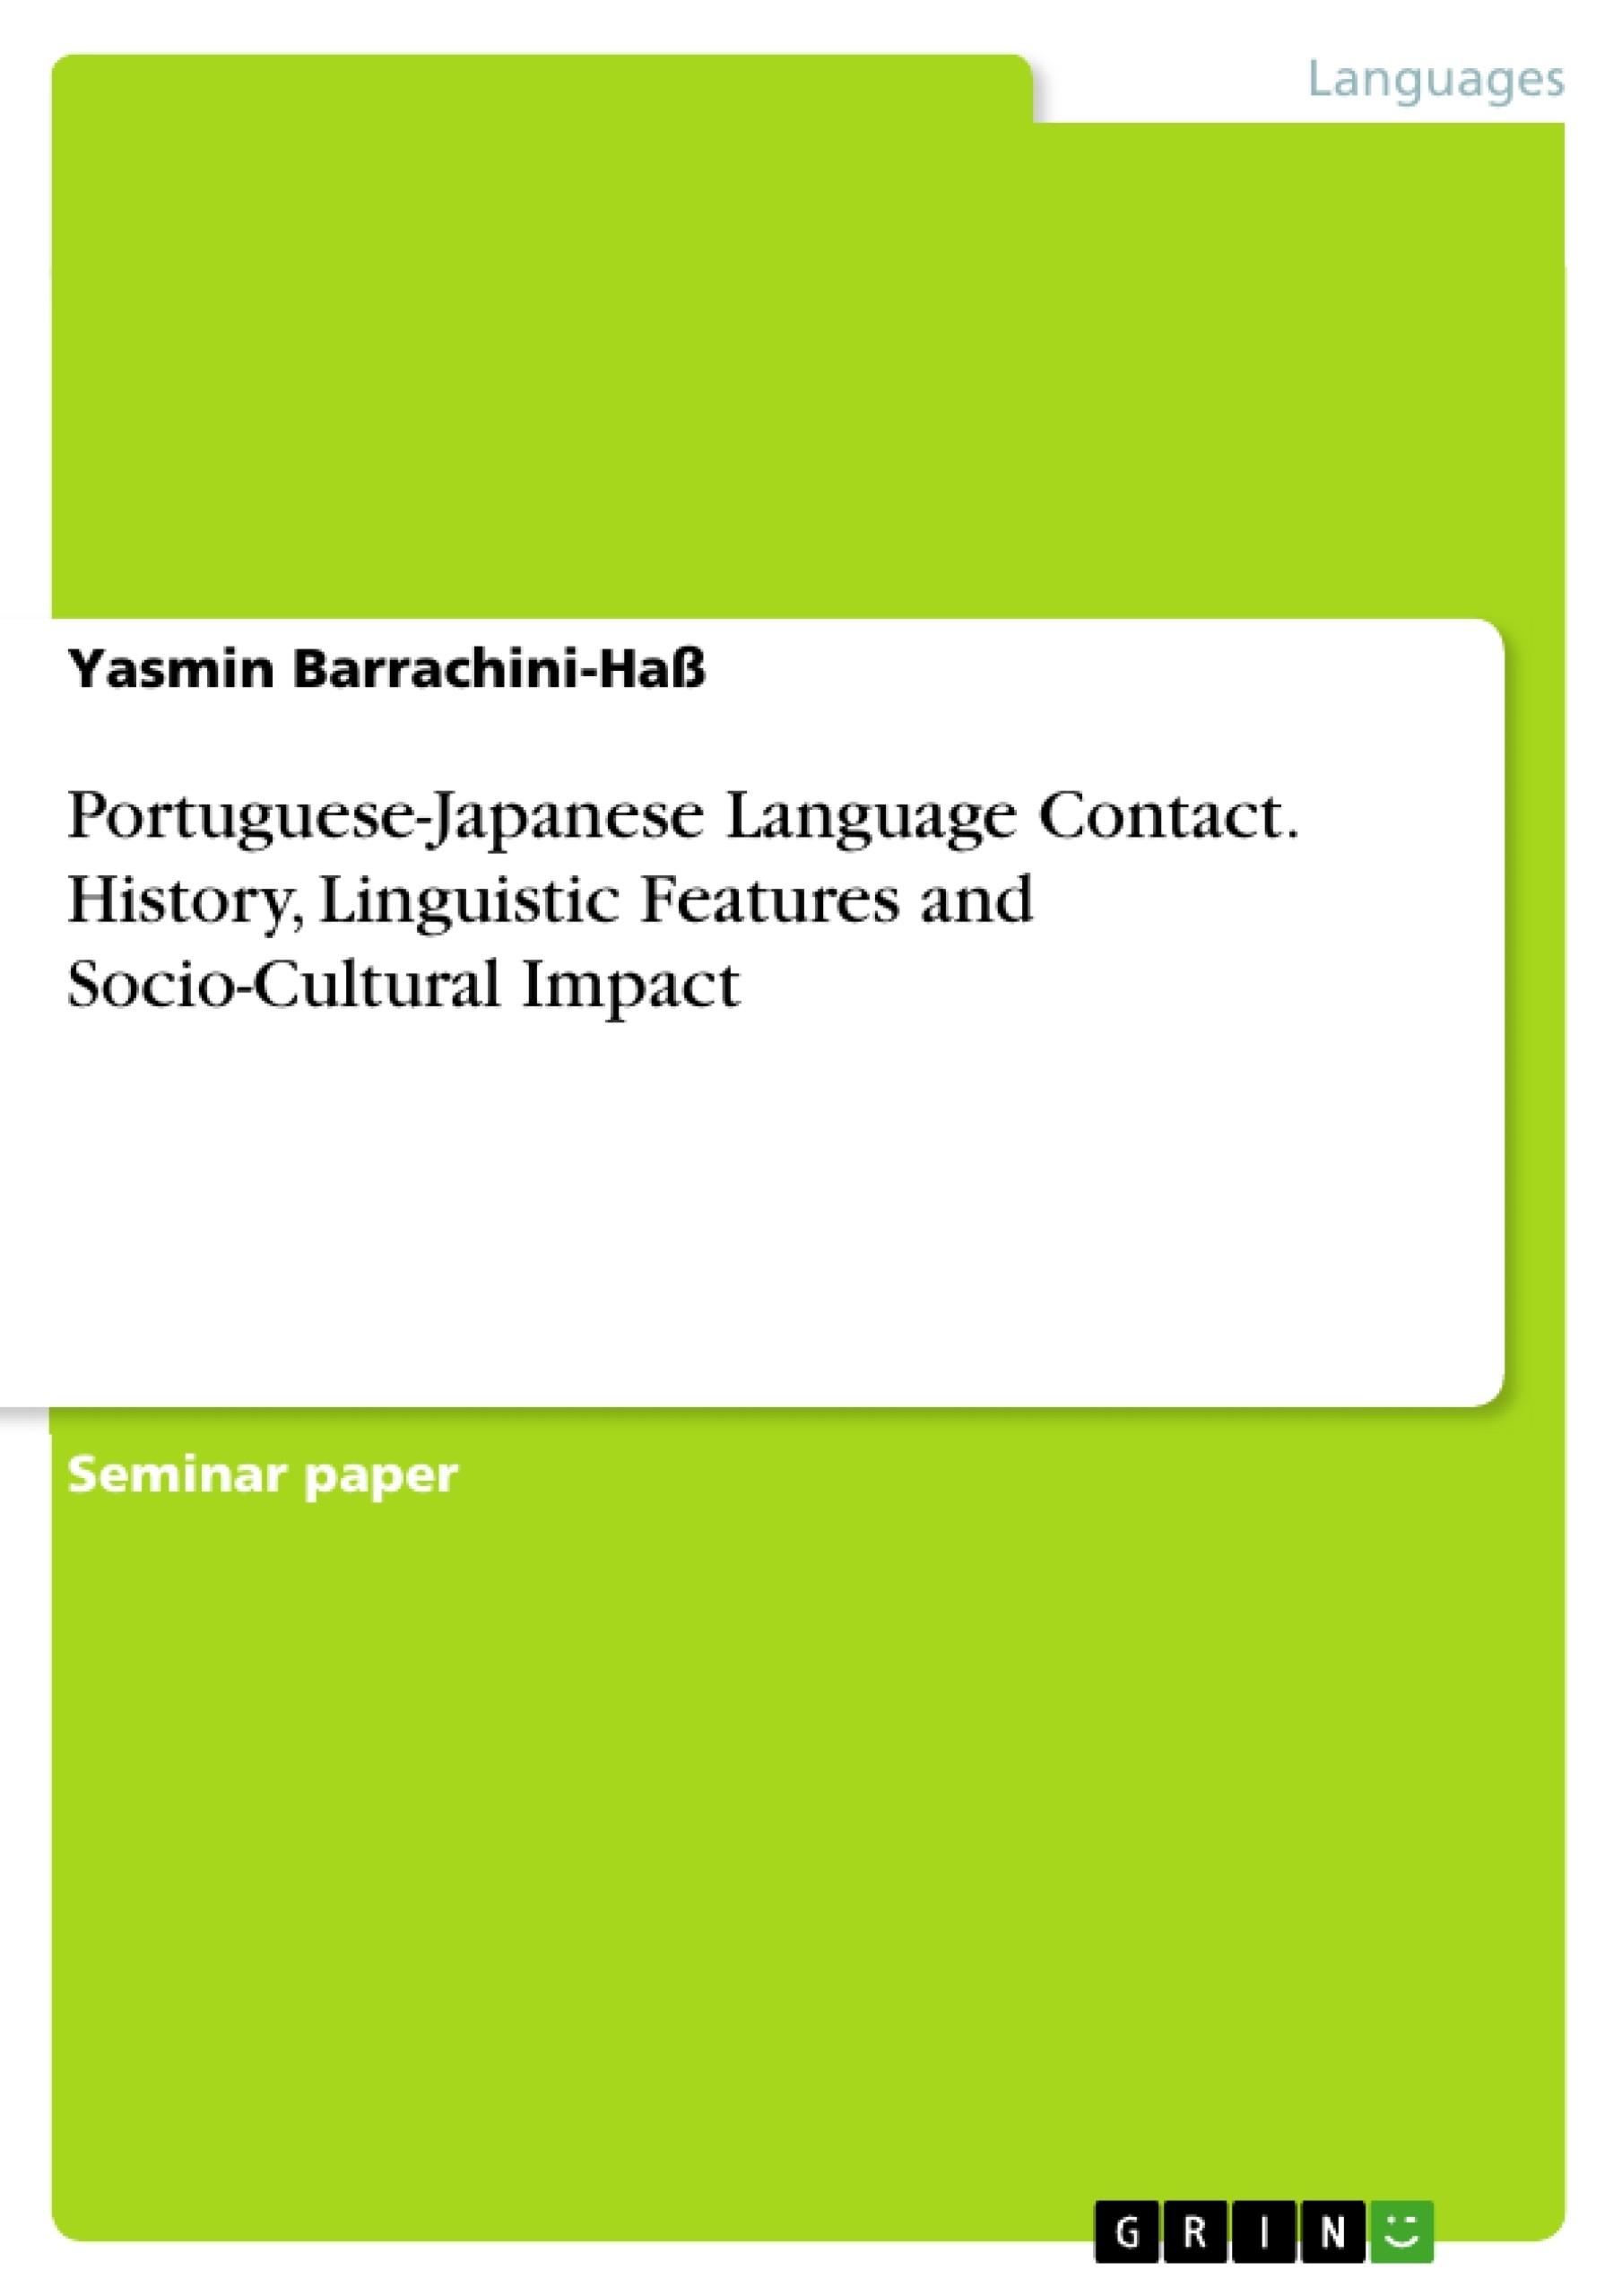 Titre: Portuguese-Japanese Language Contact. History, Linguistic Features and Socio-Cultural Impact